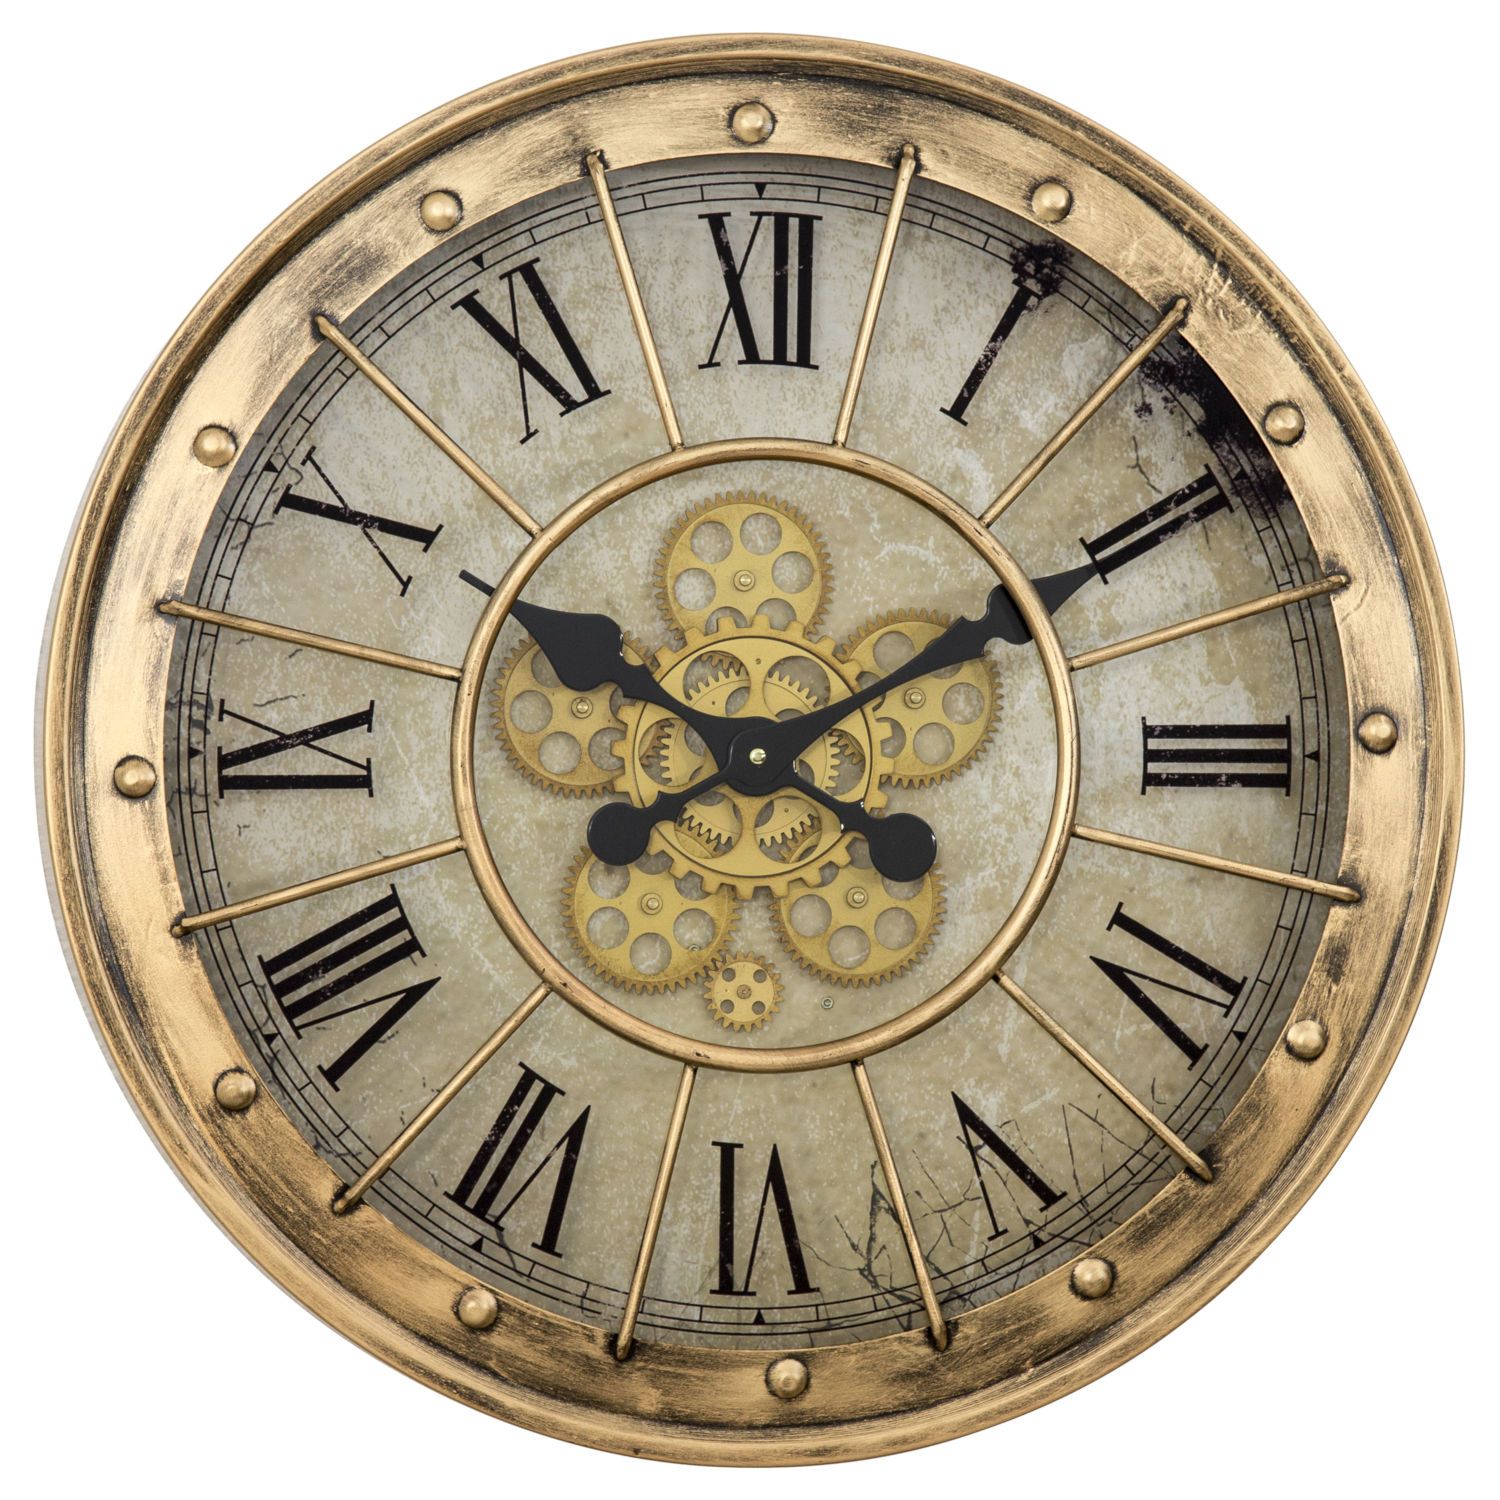 Timeless Charm: Incorporating Round Clocks into Your Home Decor